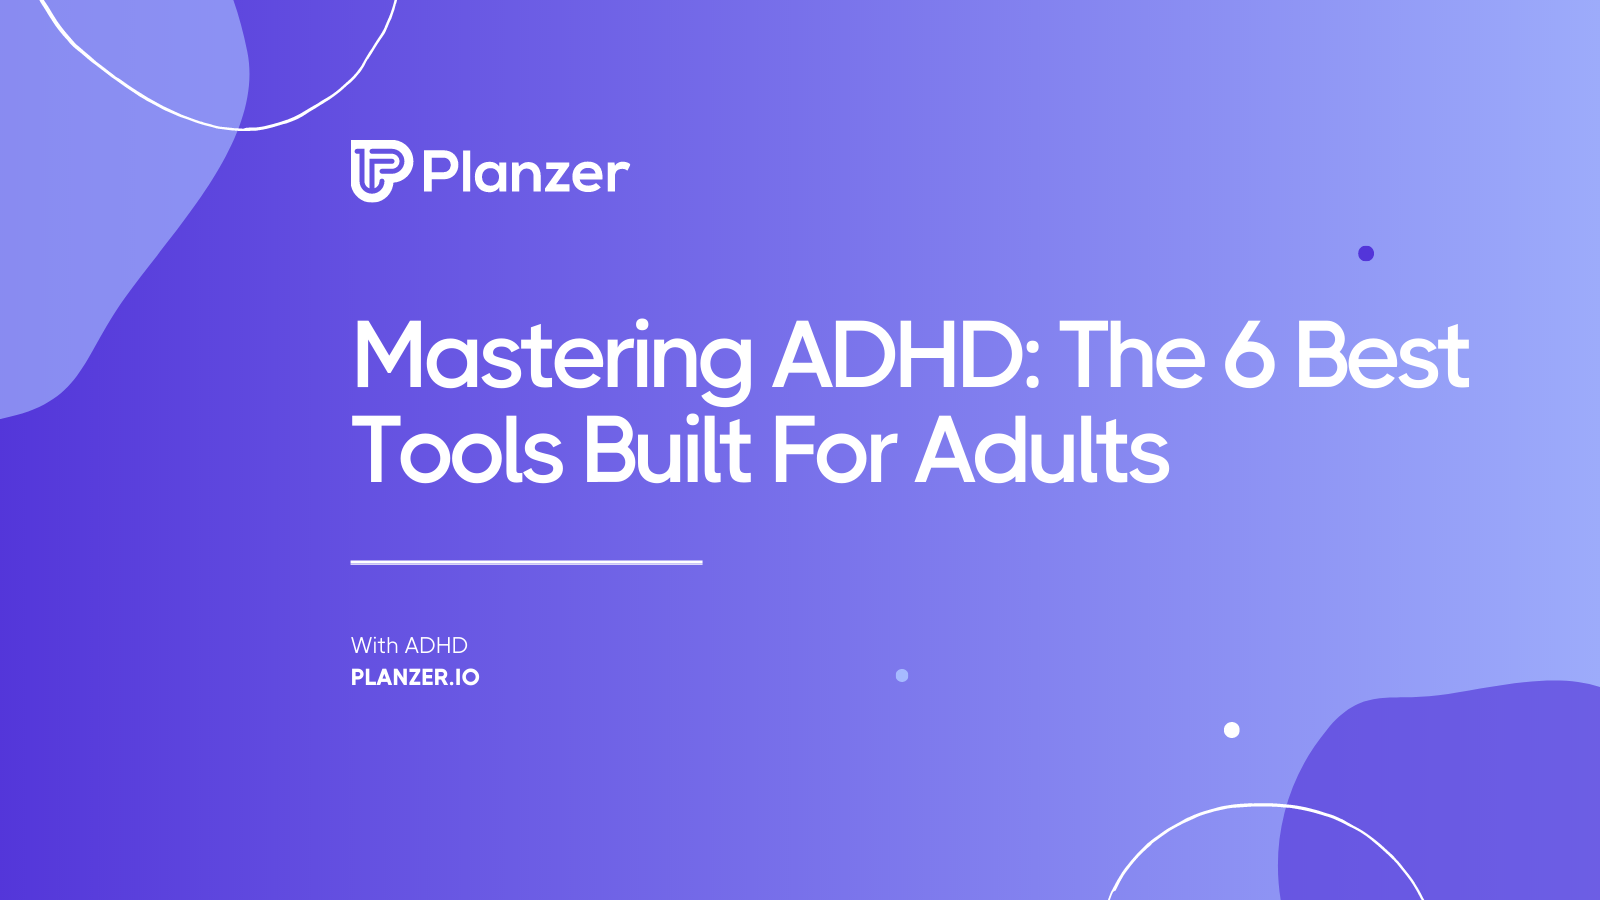 https://planzer.io/wp-content/uploads/2023/04/Mastering-ADHD-The-6-Best-Tools-Built-For-Adults-With-ADHD.png